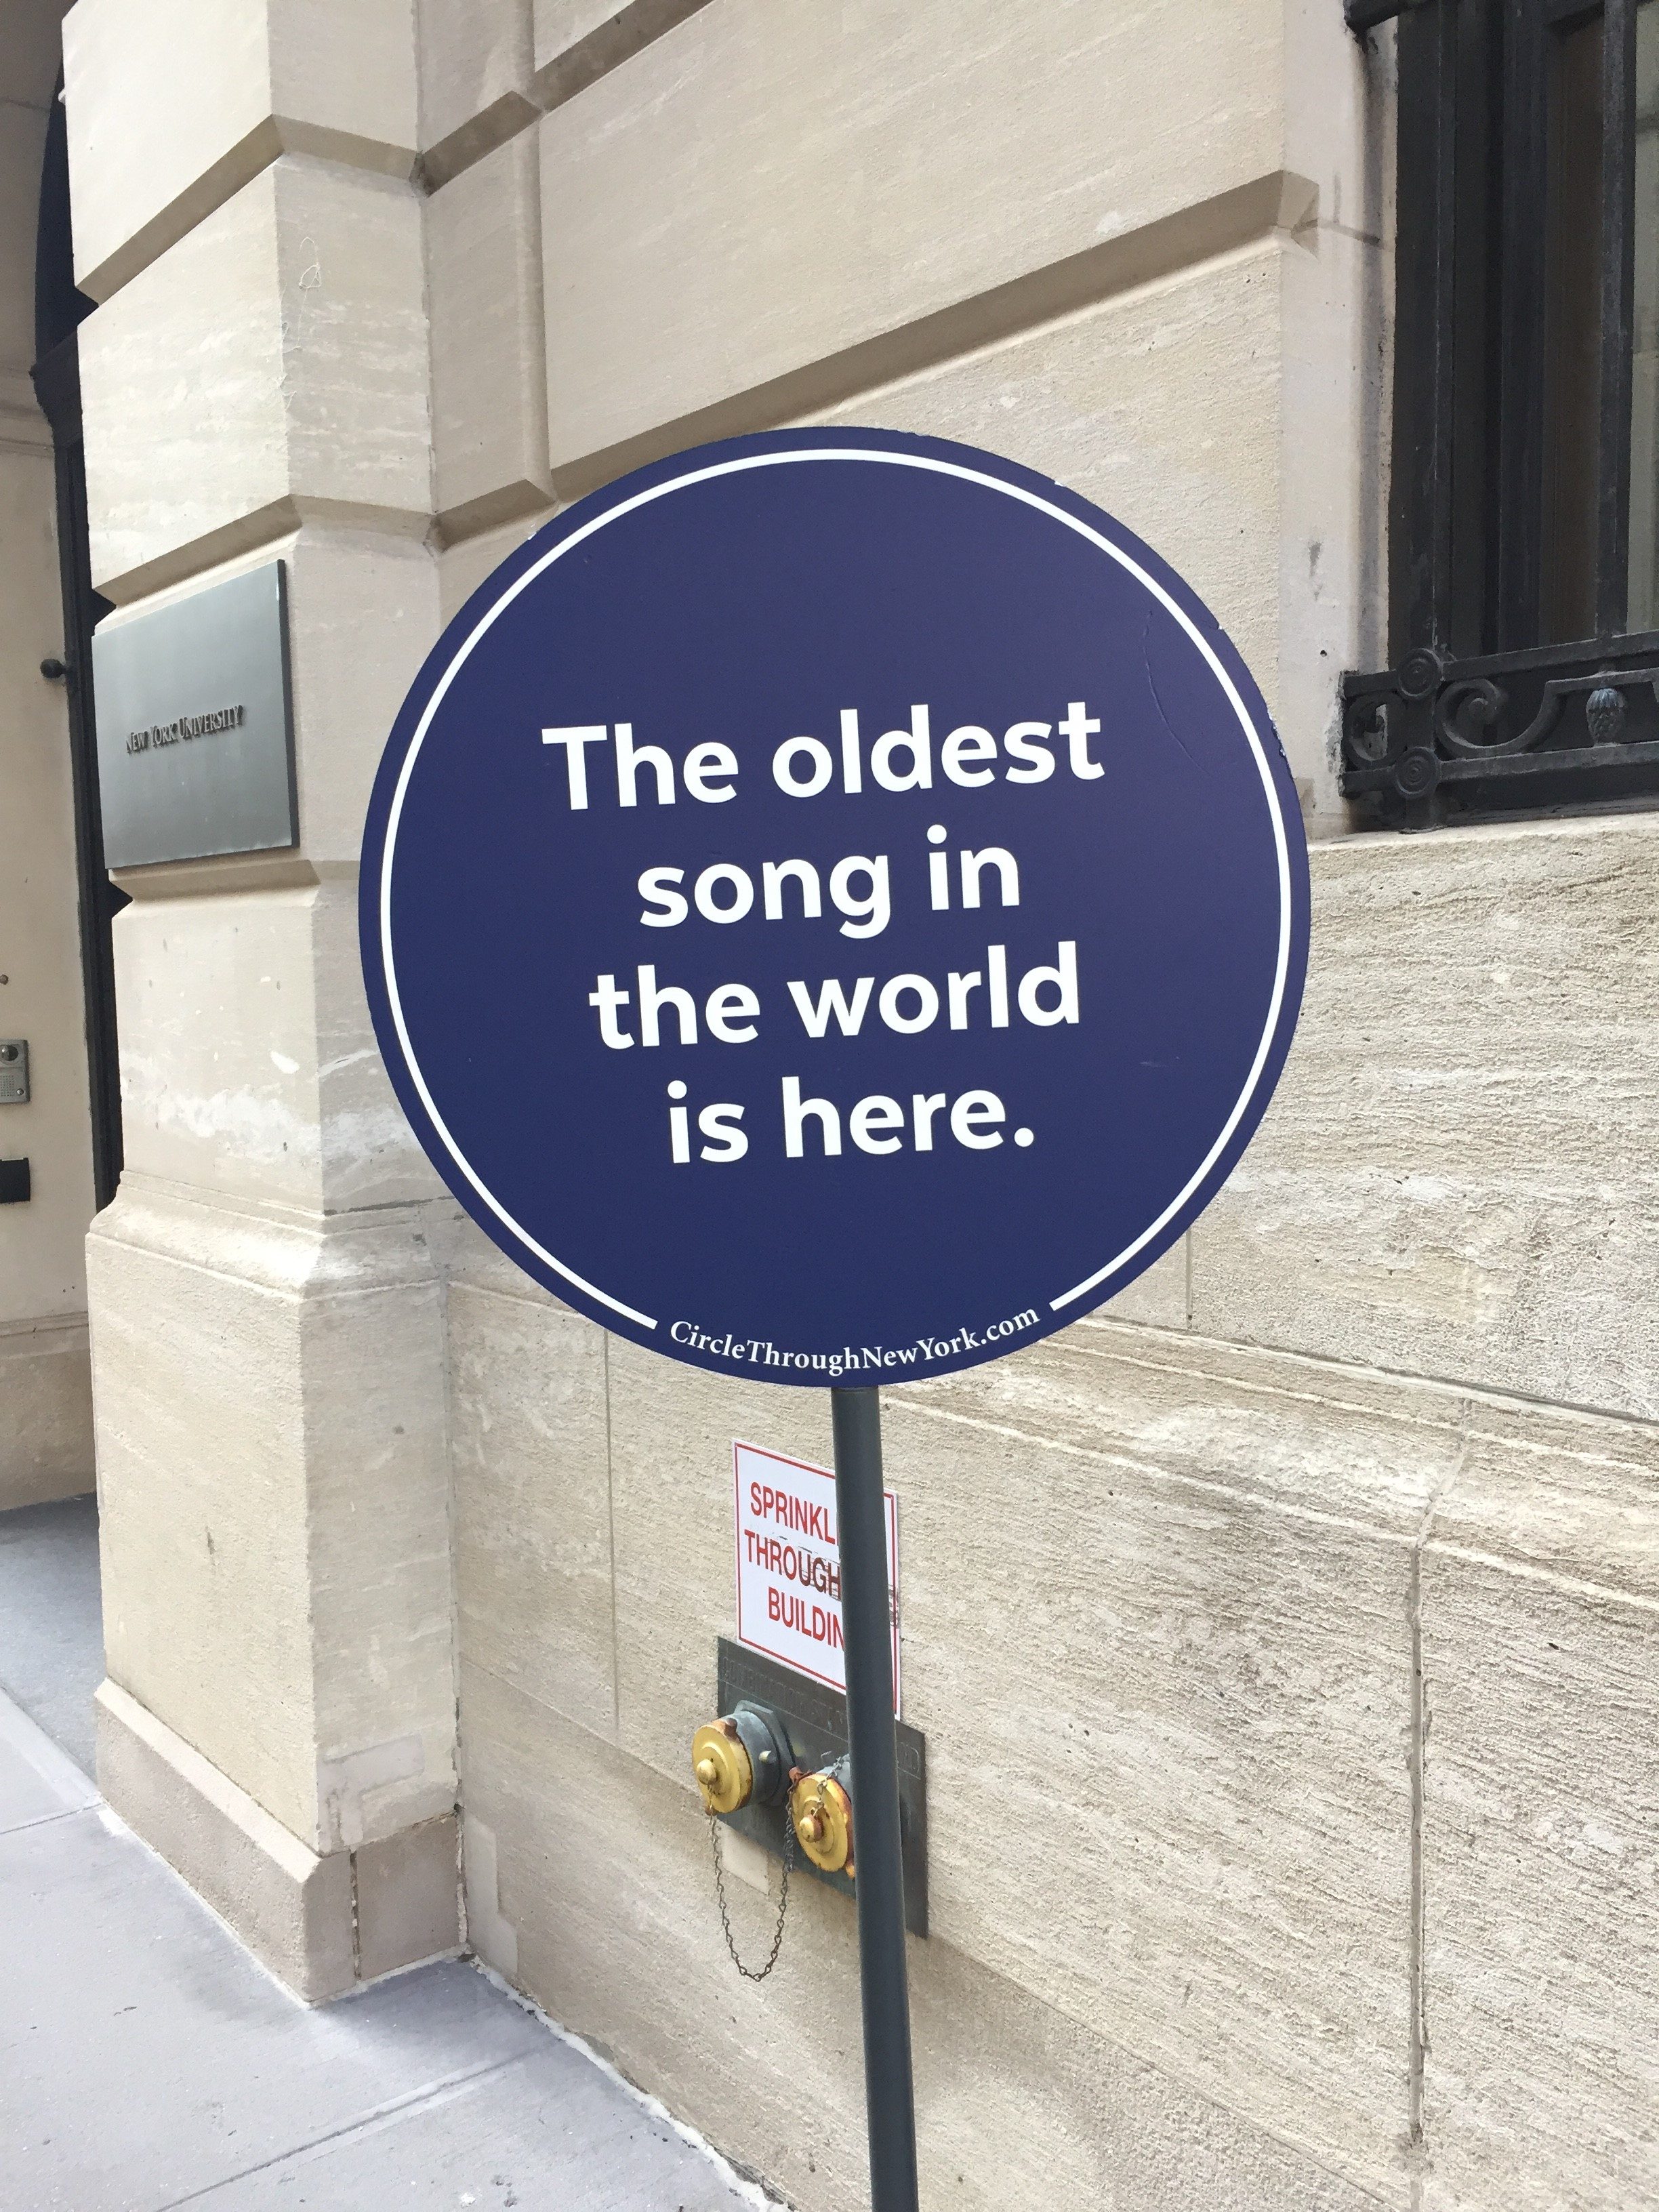 The oldest song . . .